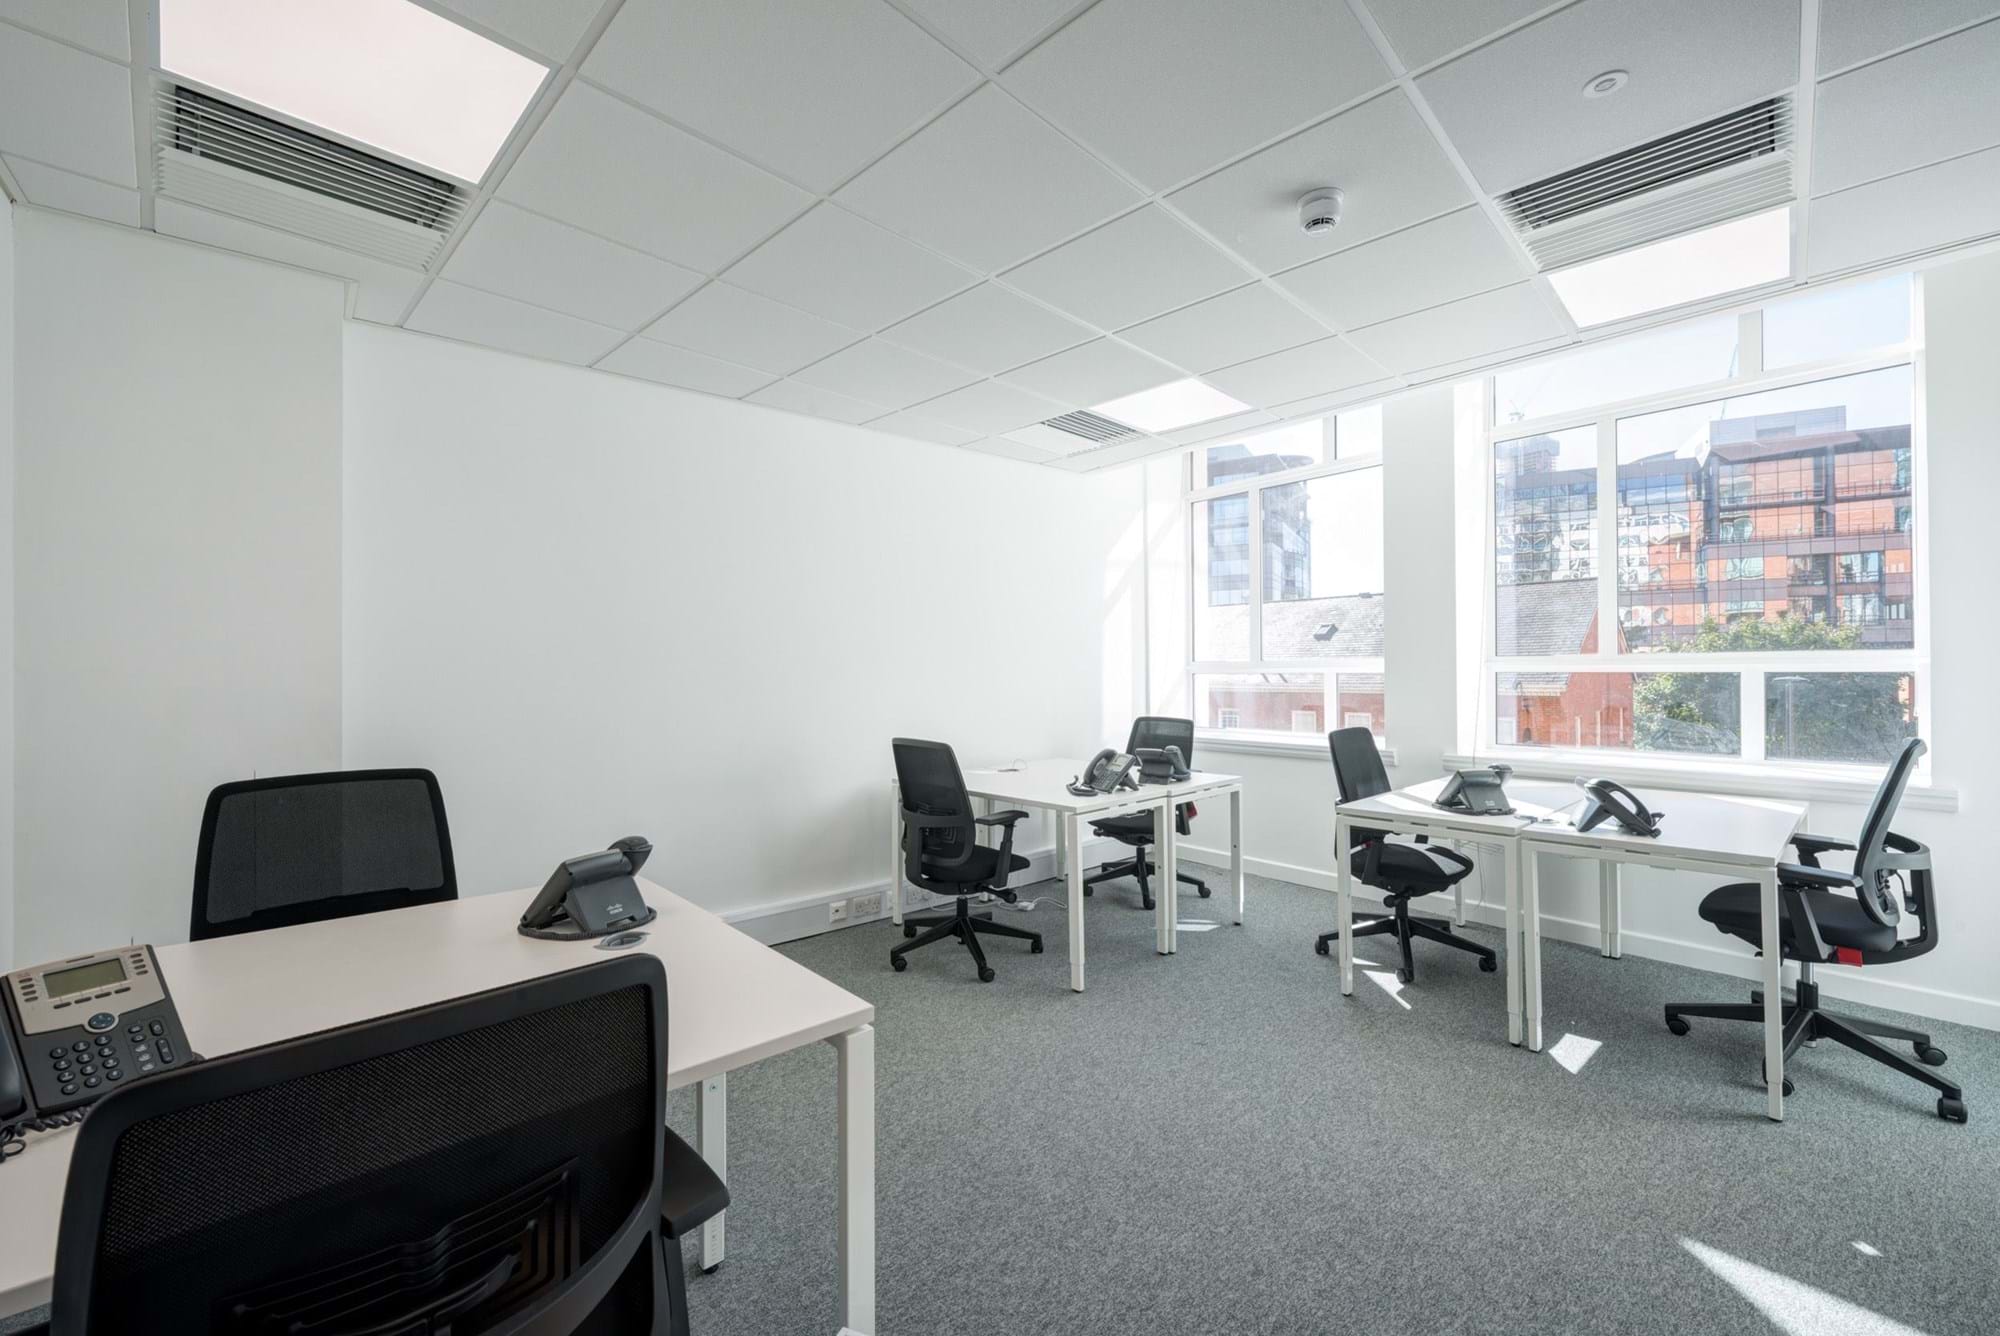 Modus Workspace office design, fit out and refurbishment - Spaces - Peter House, Manchester - Spaces Peter House 54 highres sRGB.jpg